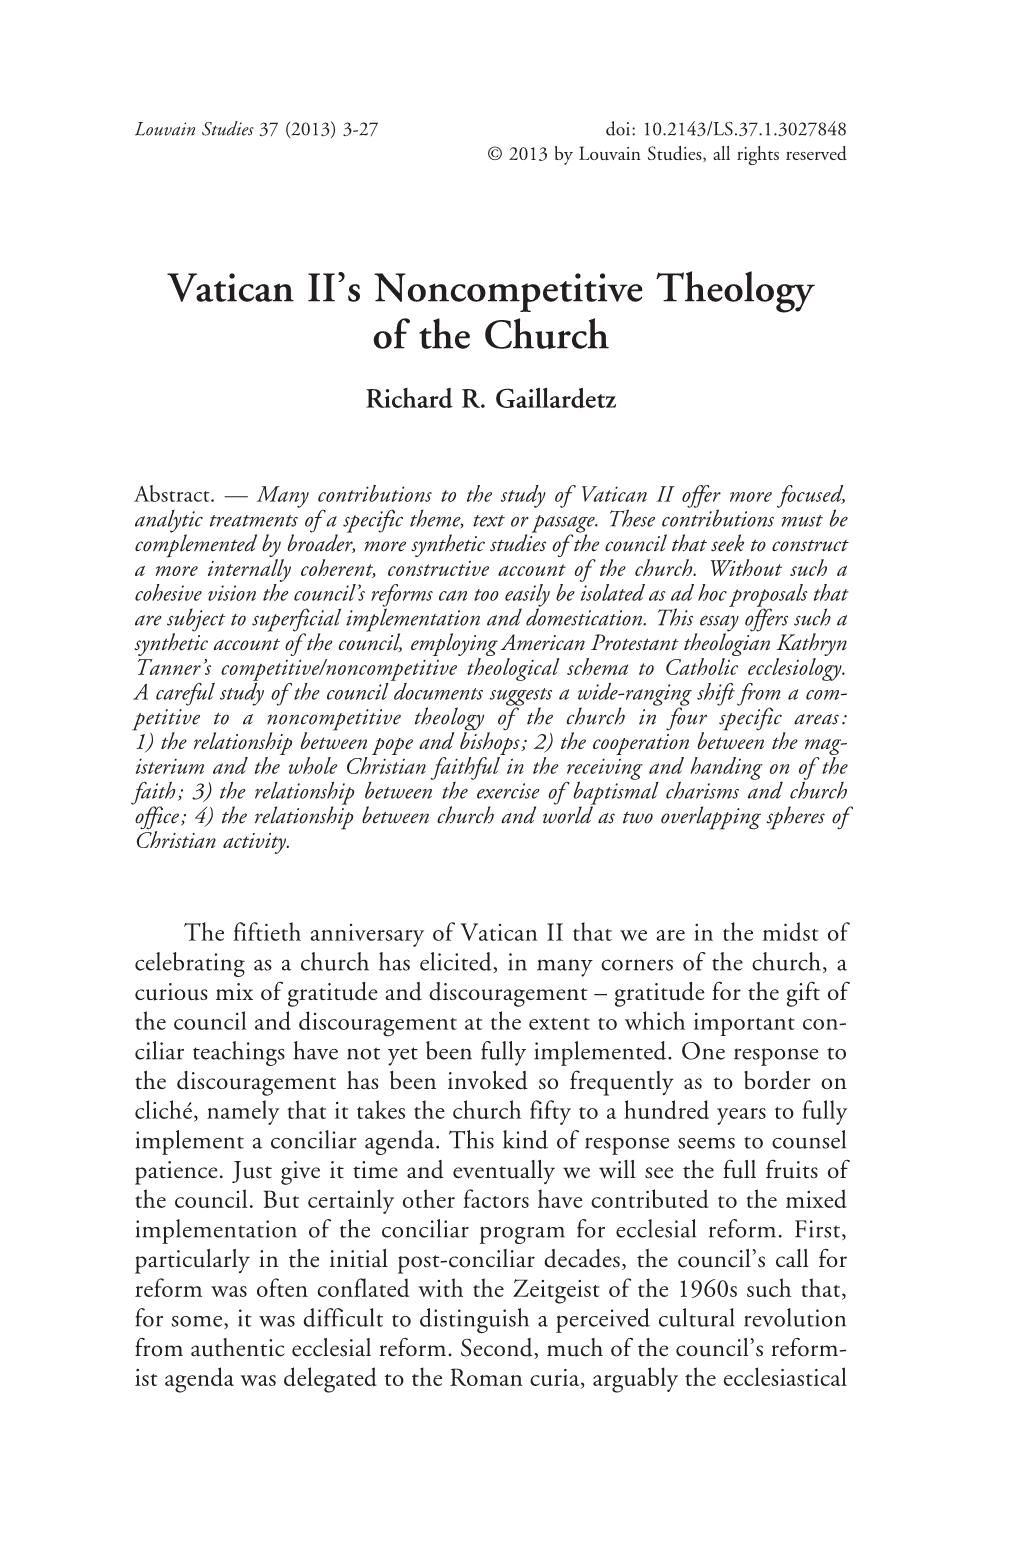 Noncompetitive Theology of the Church Richard R